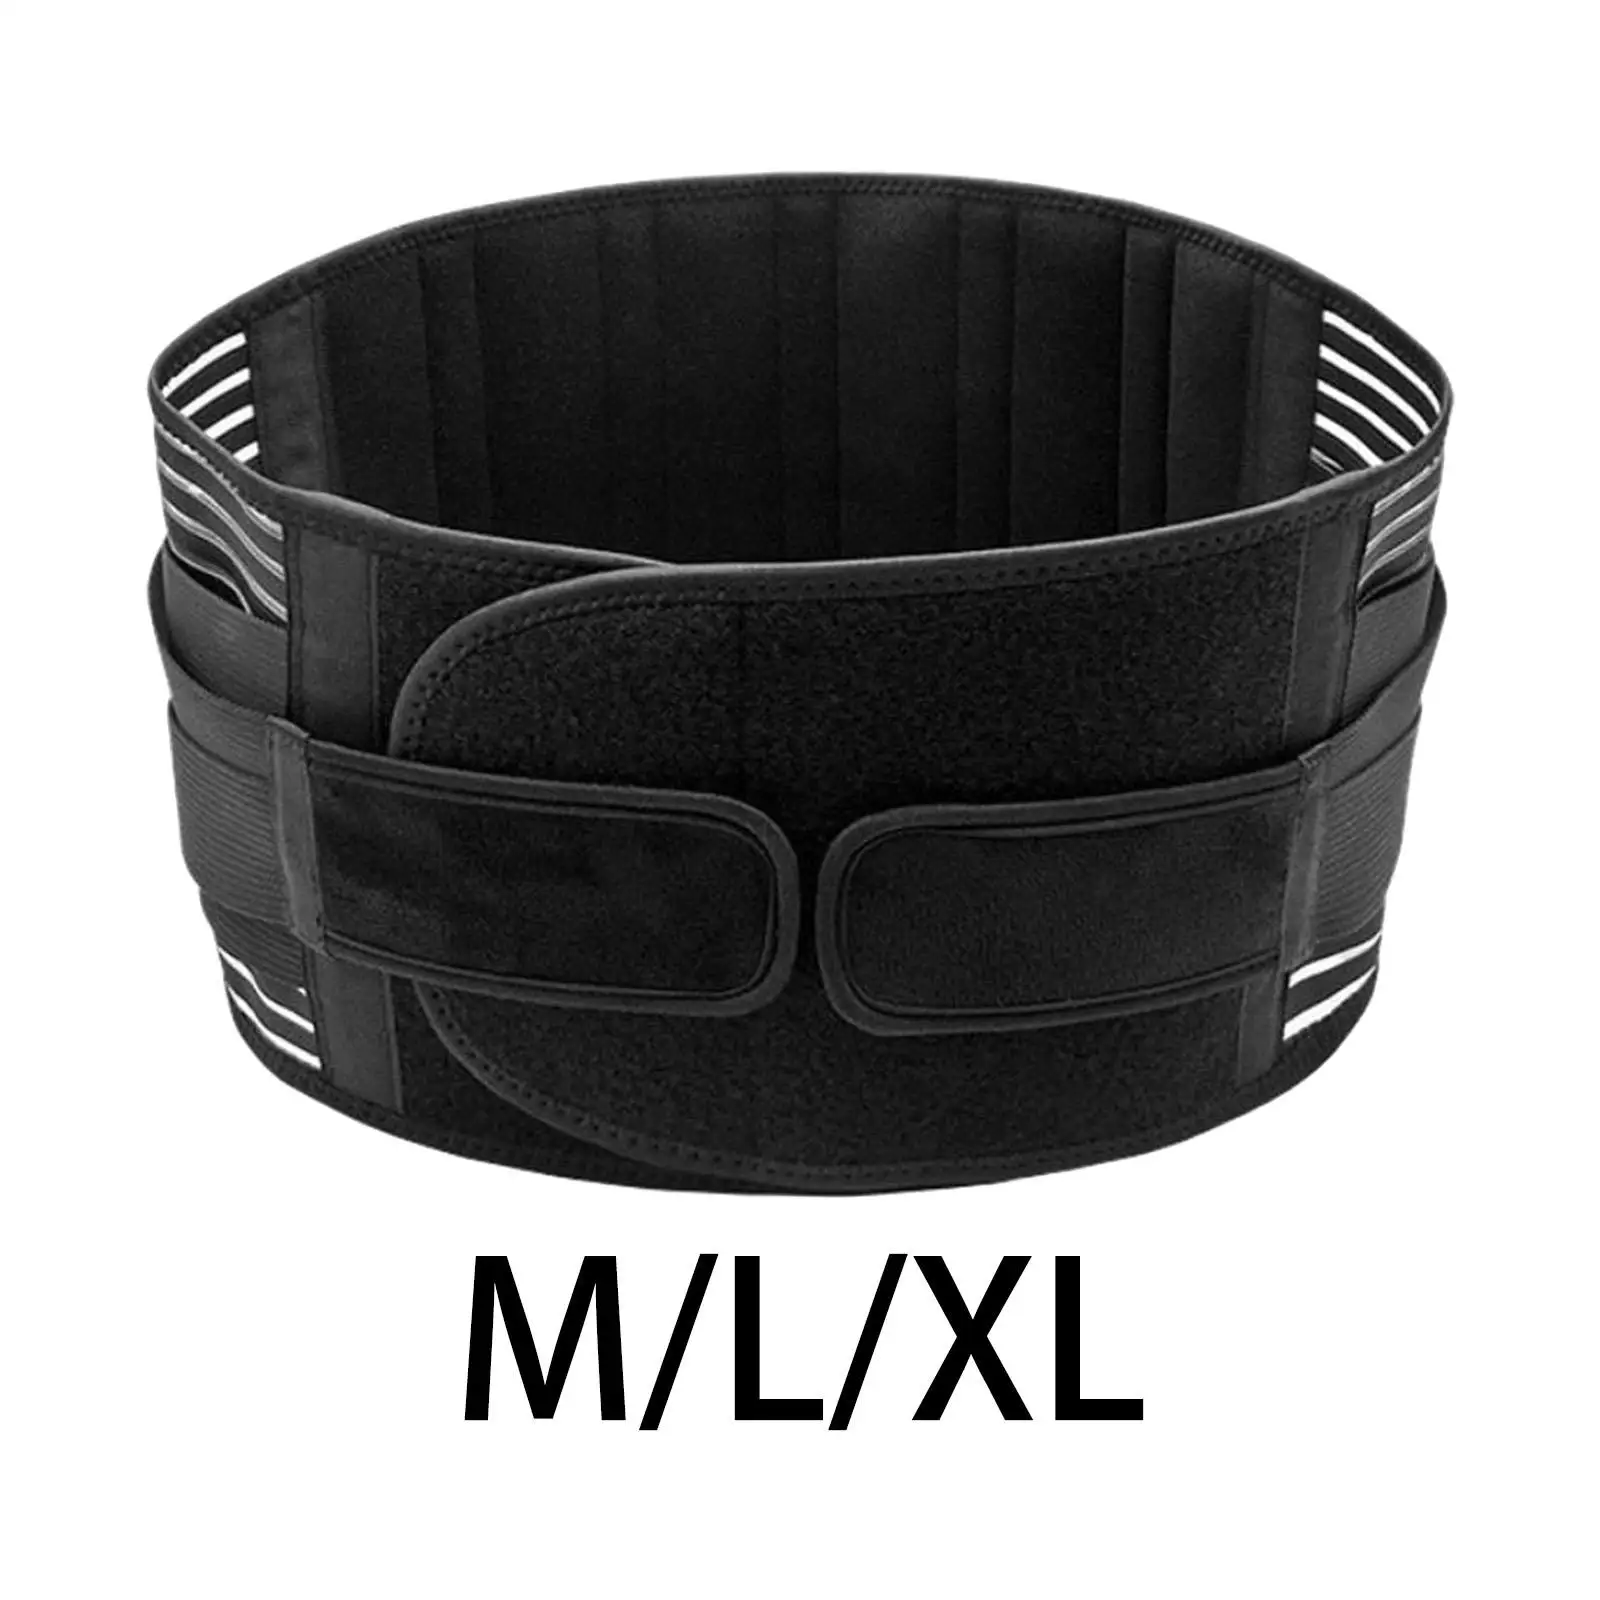 

Back Support Belt Belly Band Trainer Sauna Belt Sports Girdle Double Straps 6 Supporting Rods Wasit Brace for Back Pain Black